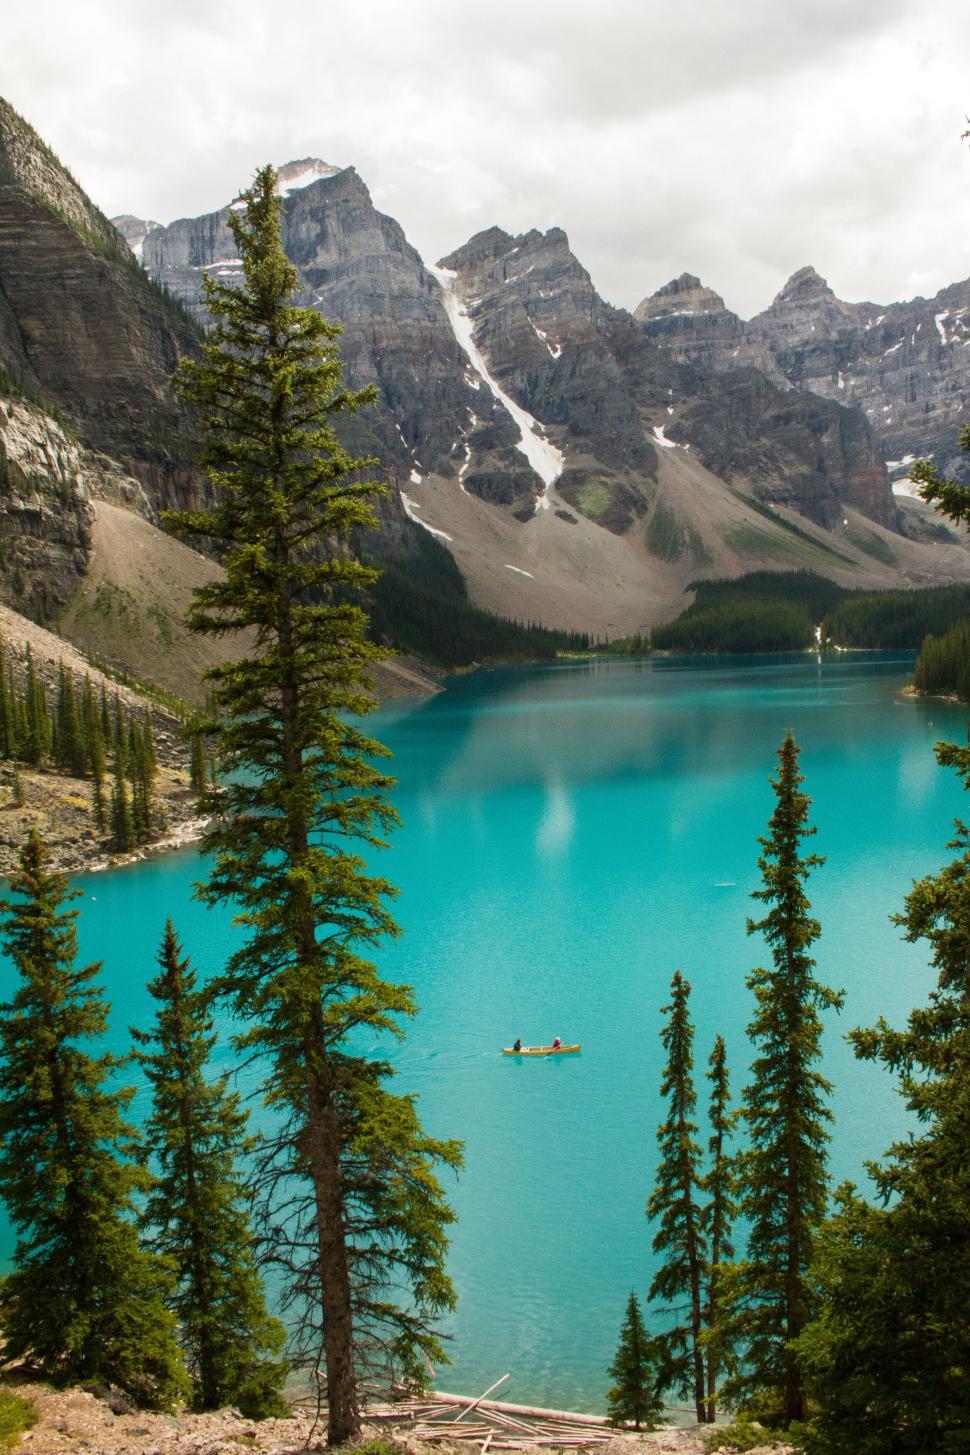 Free Image of Canoe on a turquoise glacial lake and mountains 